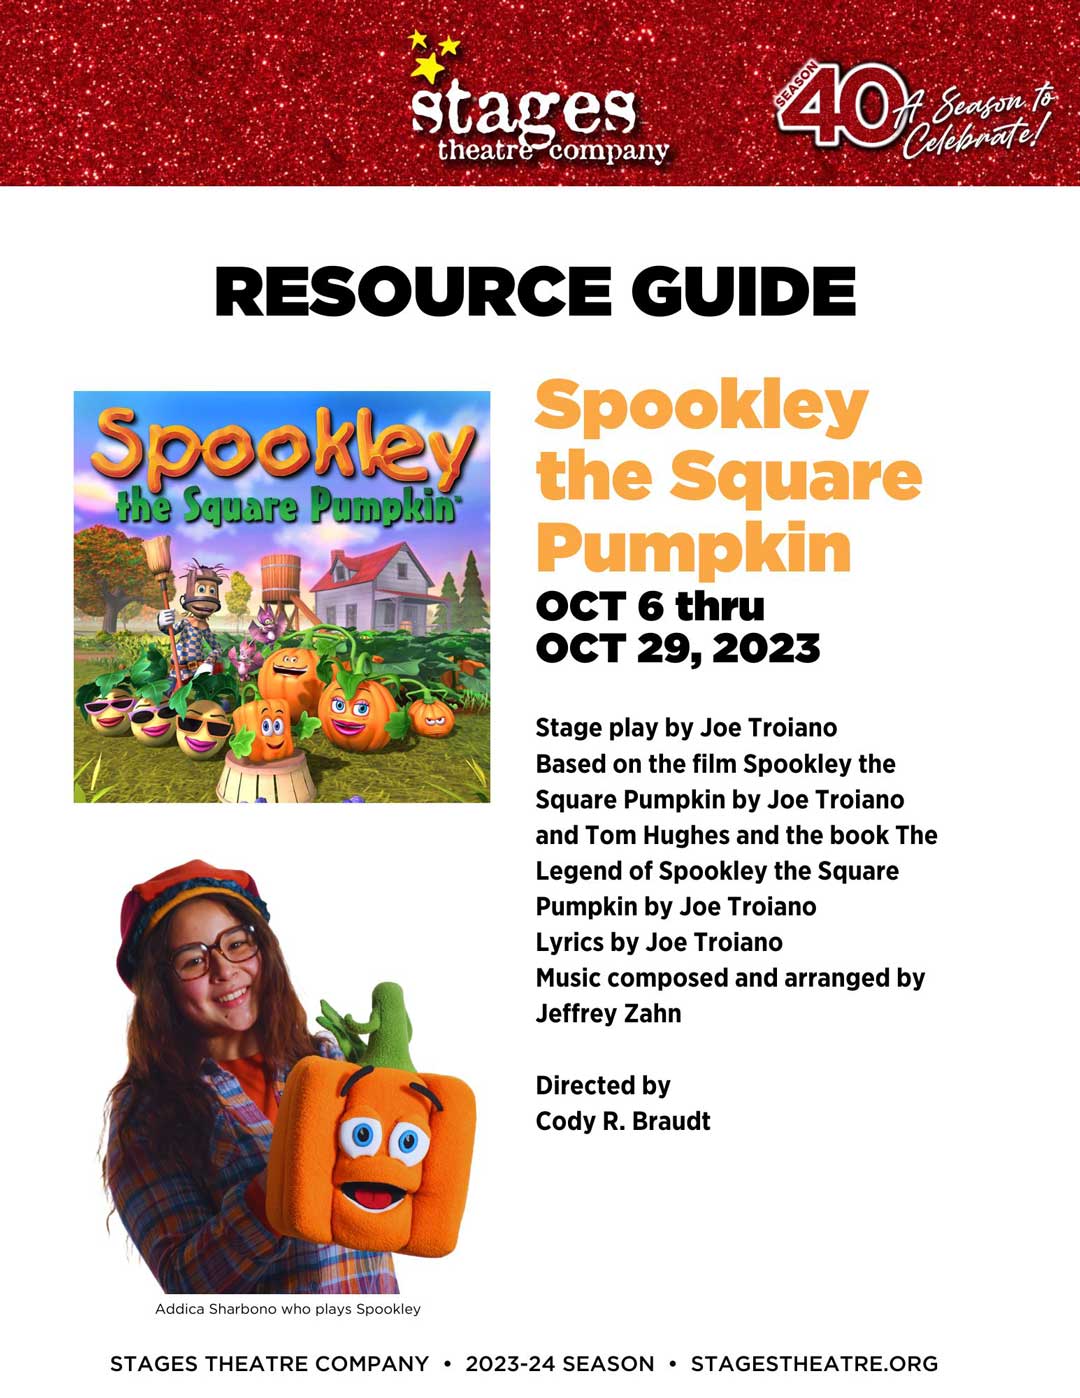 Audience Guide for SPOOKLEY THE SQUARE PUMPKIN